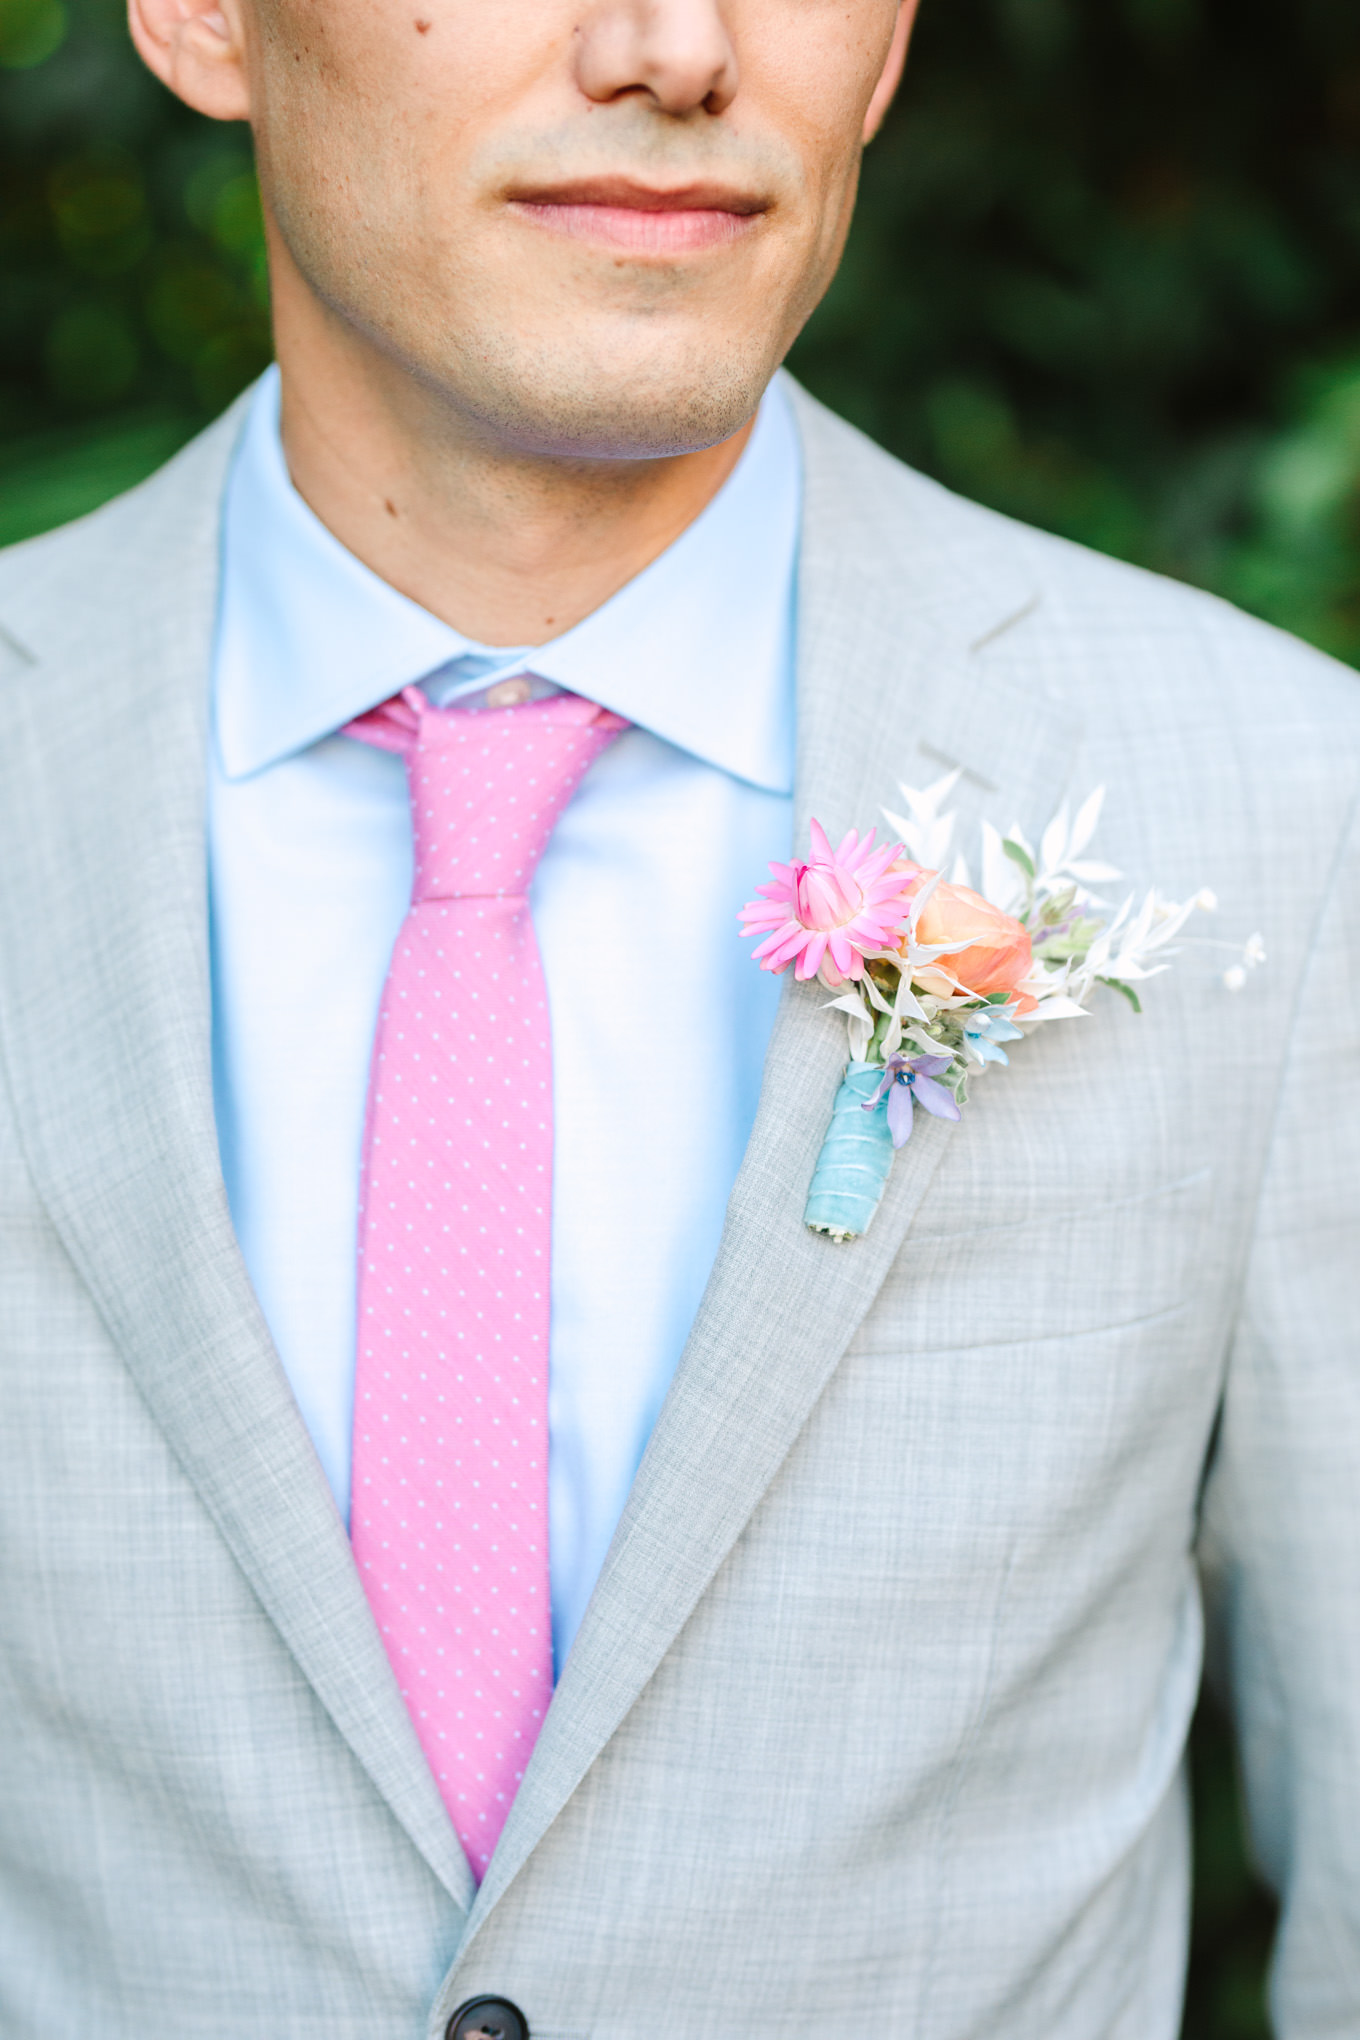 Modern pastel groom style | Colorful pop-up micro wedding at The Ruby Street Los Angeles featured on Green Wedding Shoes | Colorful and elevated photography for fun-loving couples in Southern California | #colorfulwedding #popupwedding #weddingphotography #microwedding Source: Mary Costa Photography | Los Angeles